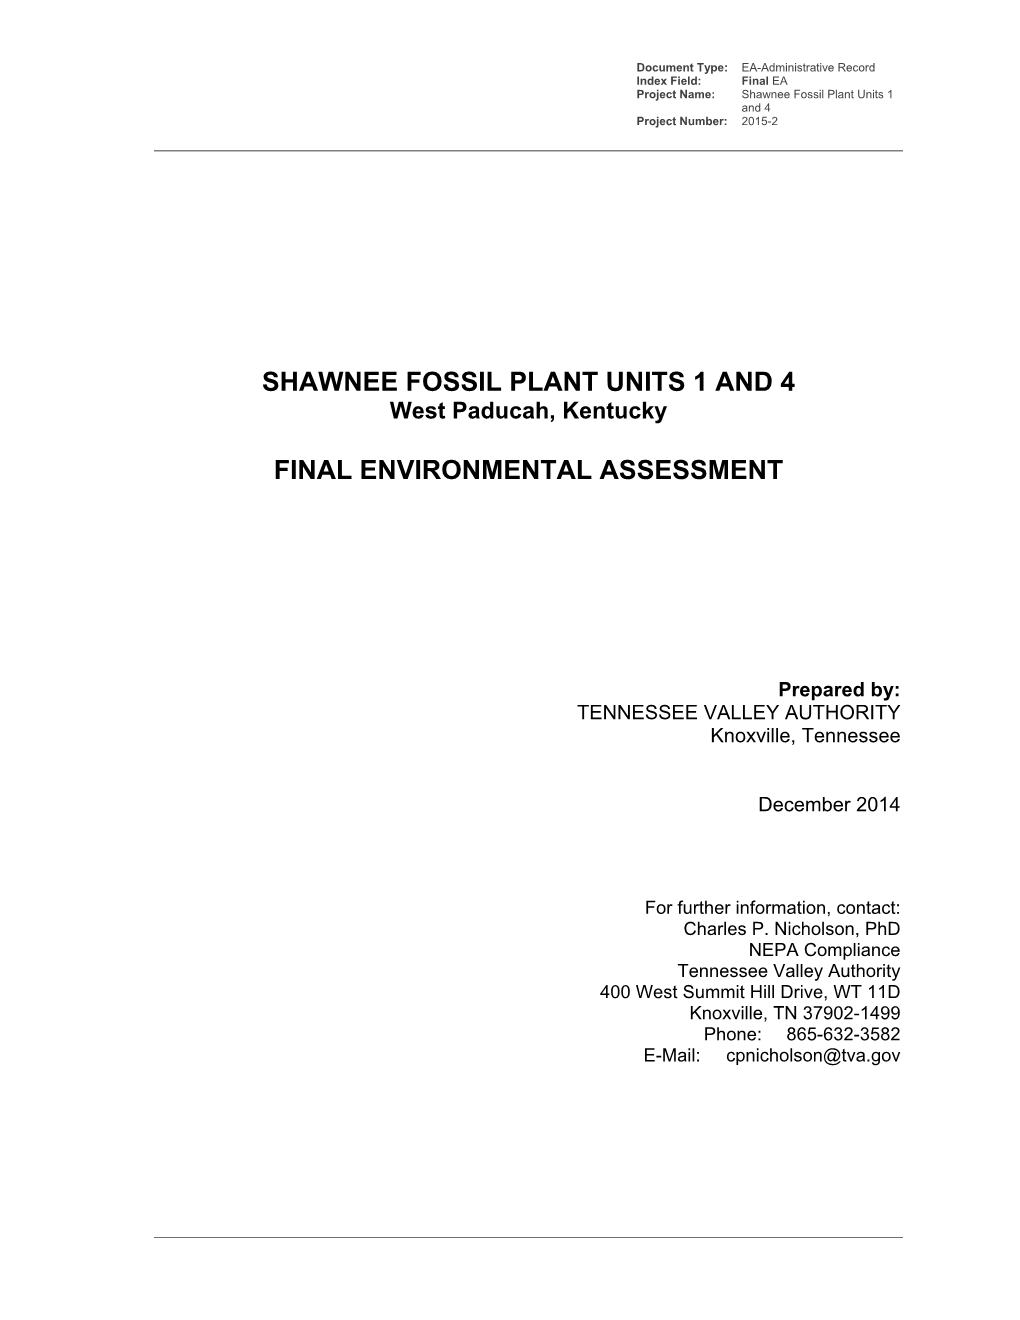 Shawnee Fossil Plant Units 1 and 4 Final Environmental